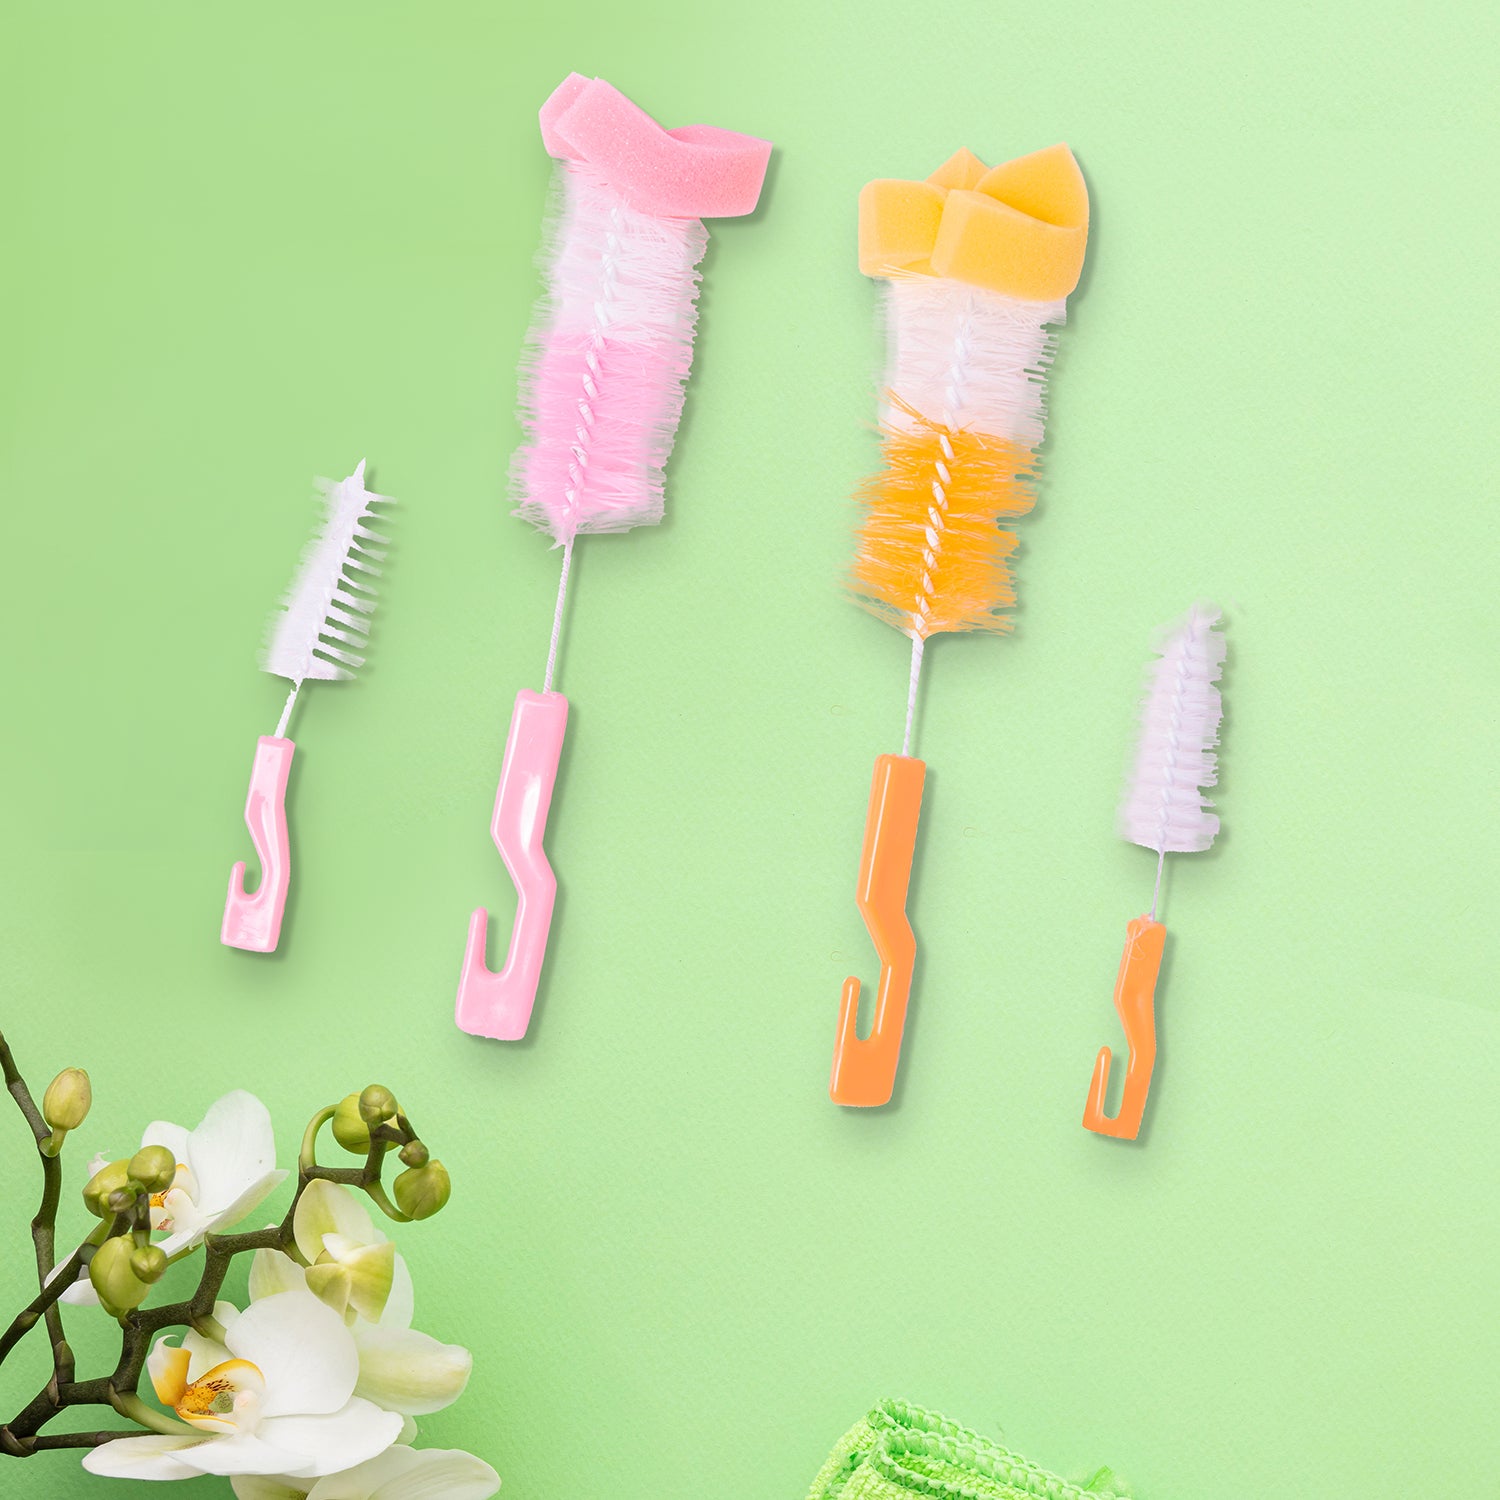 2 in 1 Cleaning Product Baby Bottle Sponge Cleaning Brush - China Bottle  Cleaning Brush and Sponge Brush price